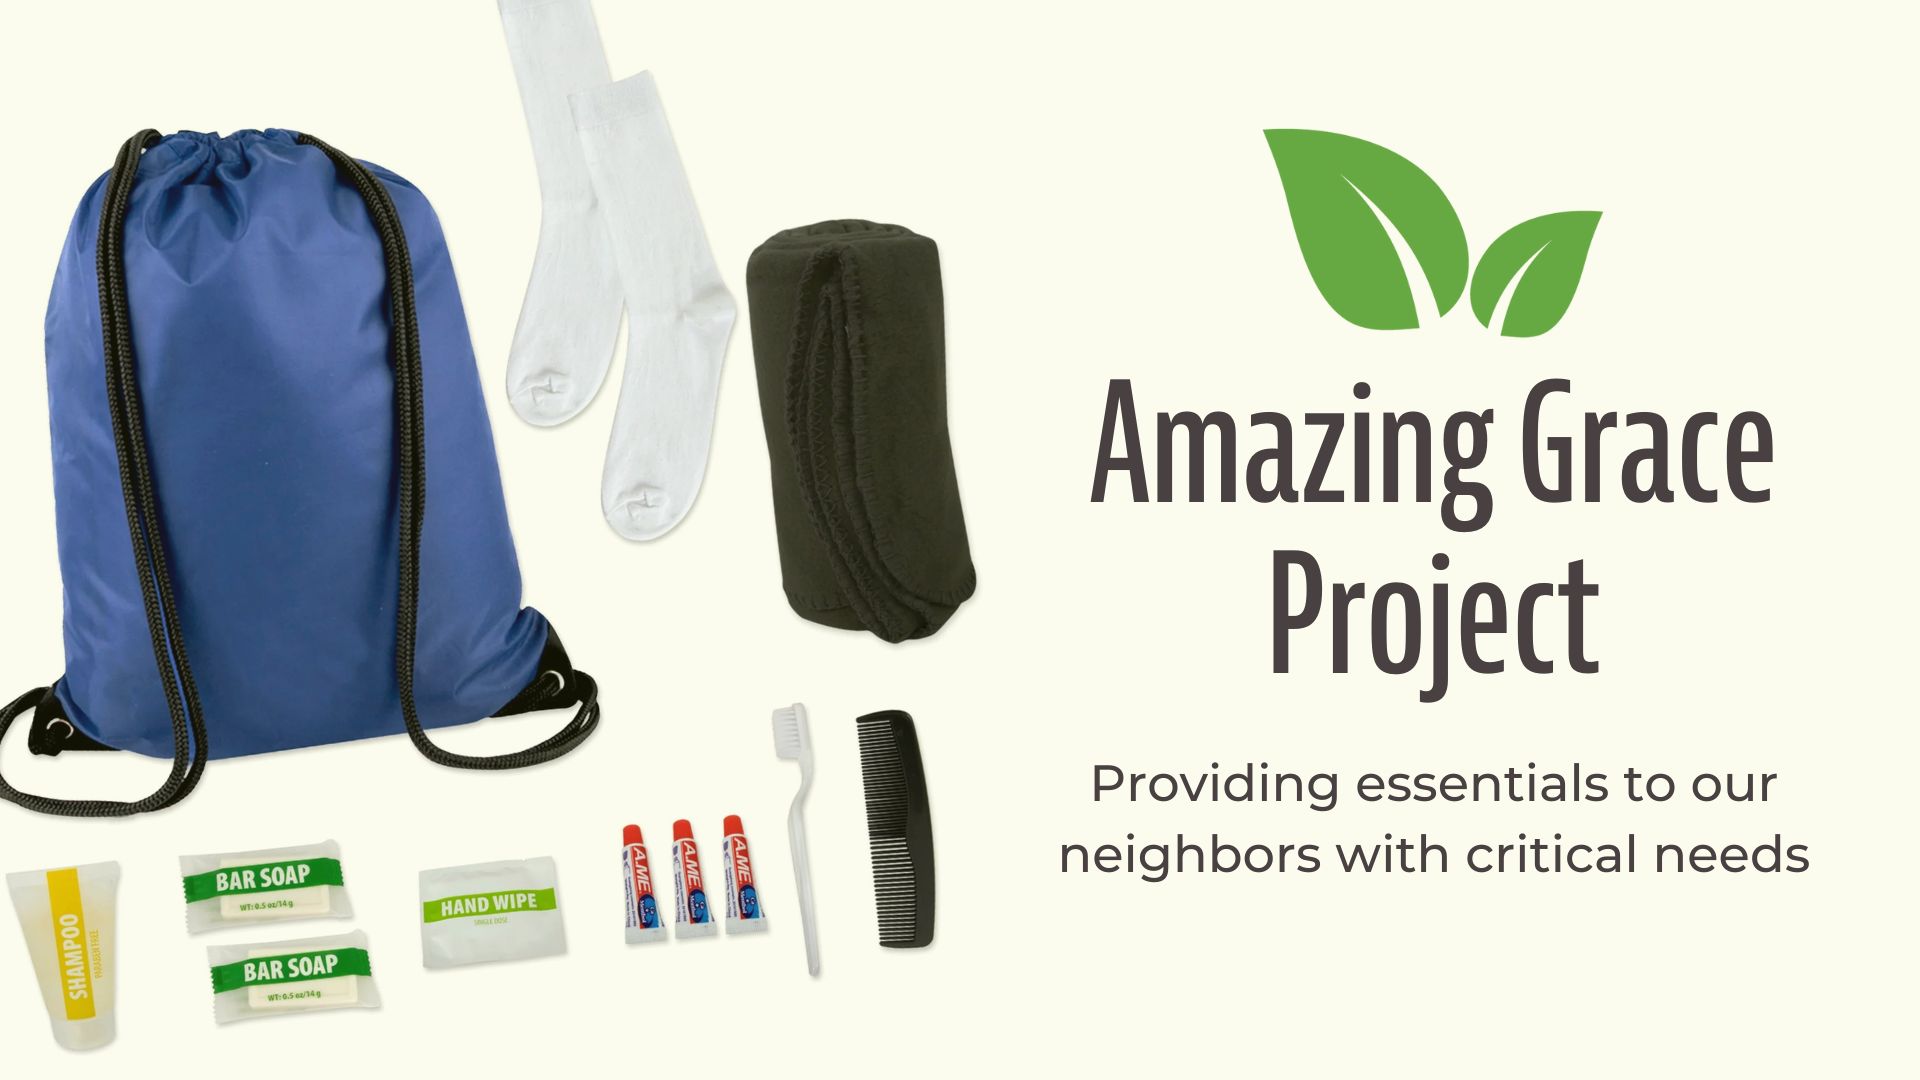 Photo of bag with toothbrush, comb, socks, toothpaste, soap and more with the Amazing Grace project logo